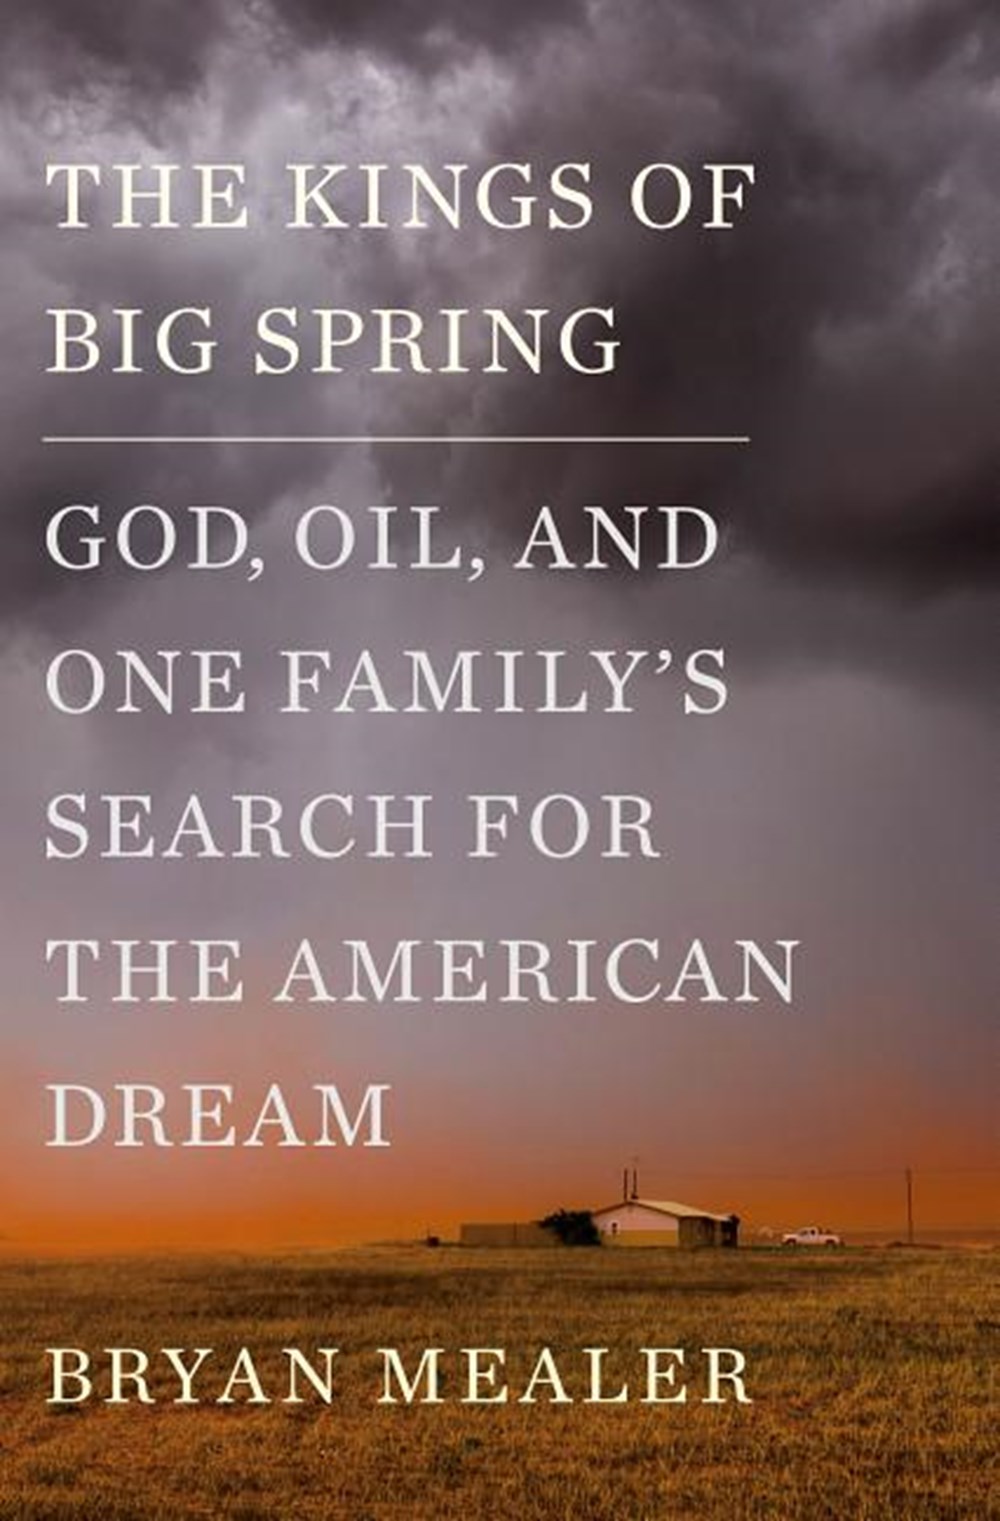 Kings of Big Spring: God, Oil, and One Family's Search for the American Dream